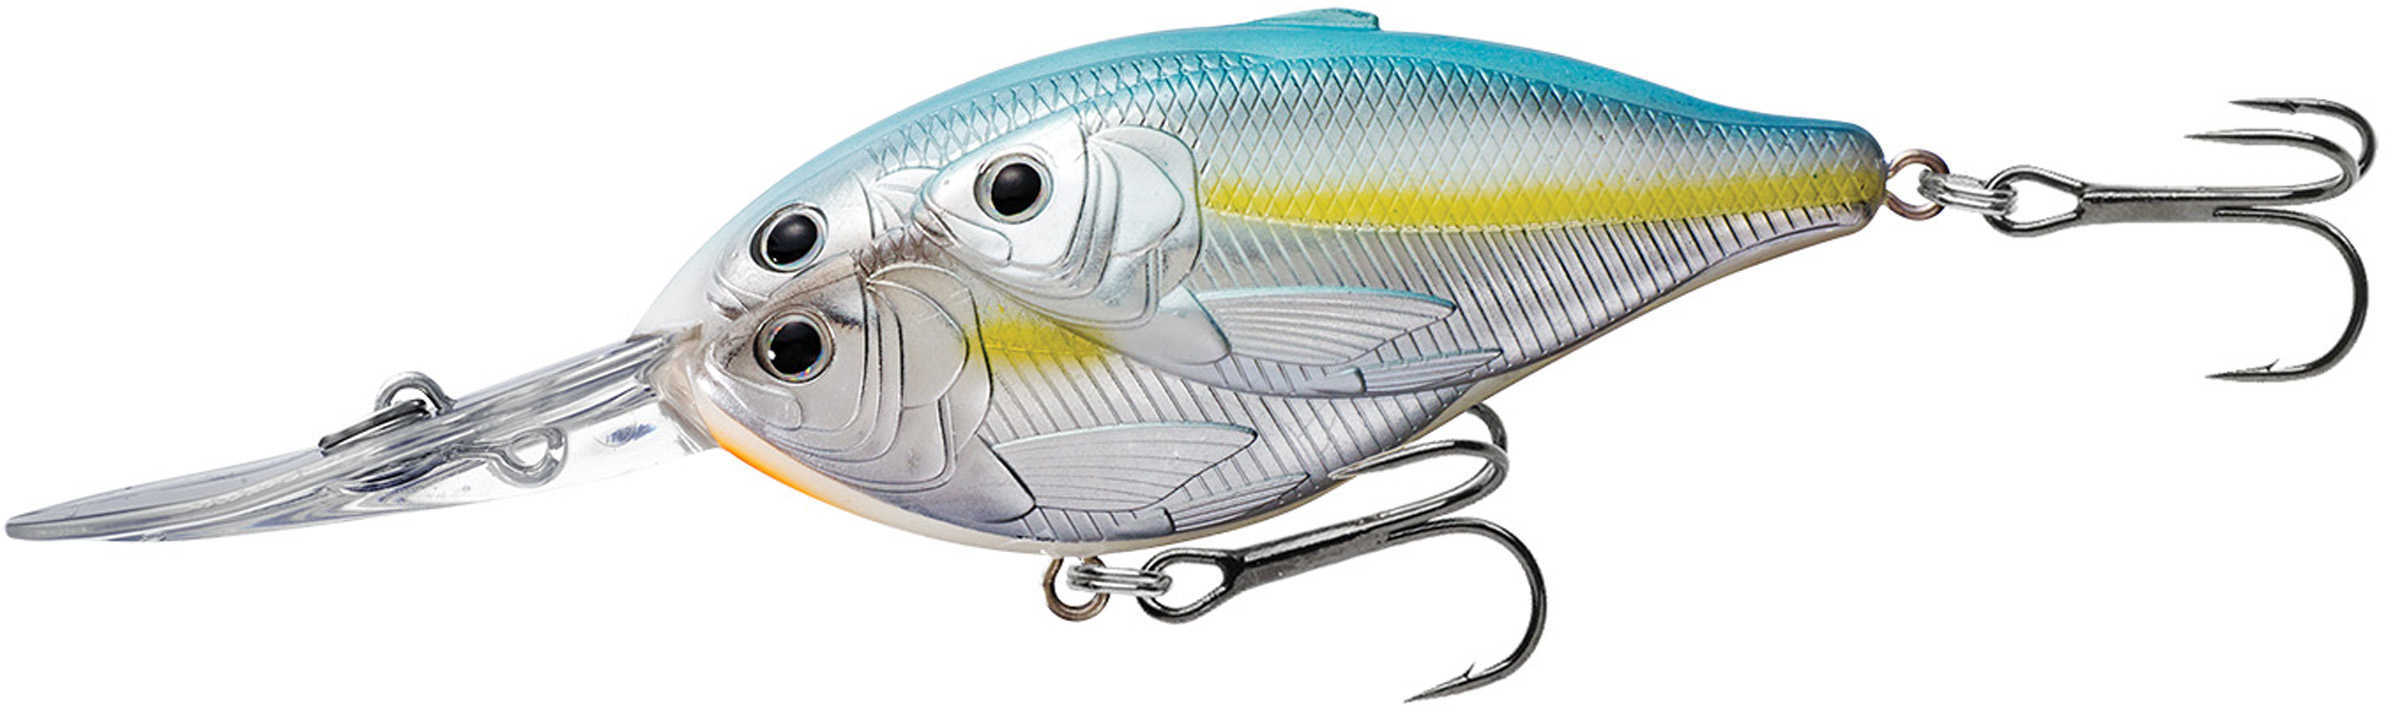 LIVETARGET Lures / Koppers Fishing and Tackle Corp Threadfin Shad Crankbait 3" Number 2 Hook Size 16 Depth Metallic Pearl/Blue